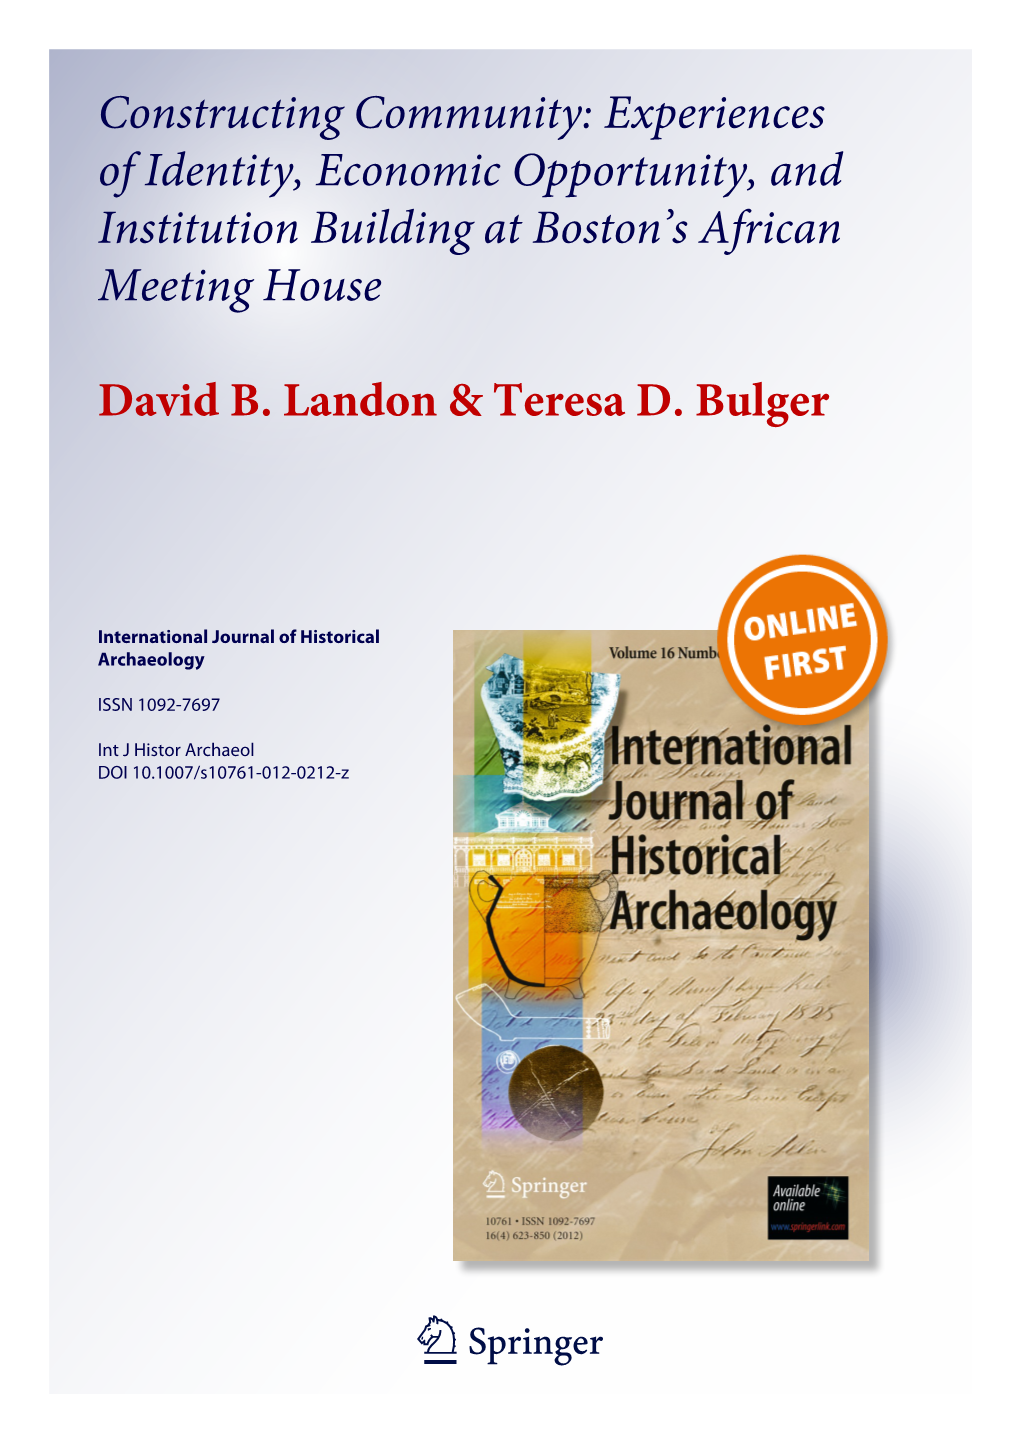 Constructing Community: Experiences of Identity, Economic Opportunity, and Institution Building at Boston’S African Meeting House